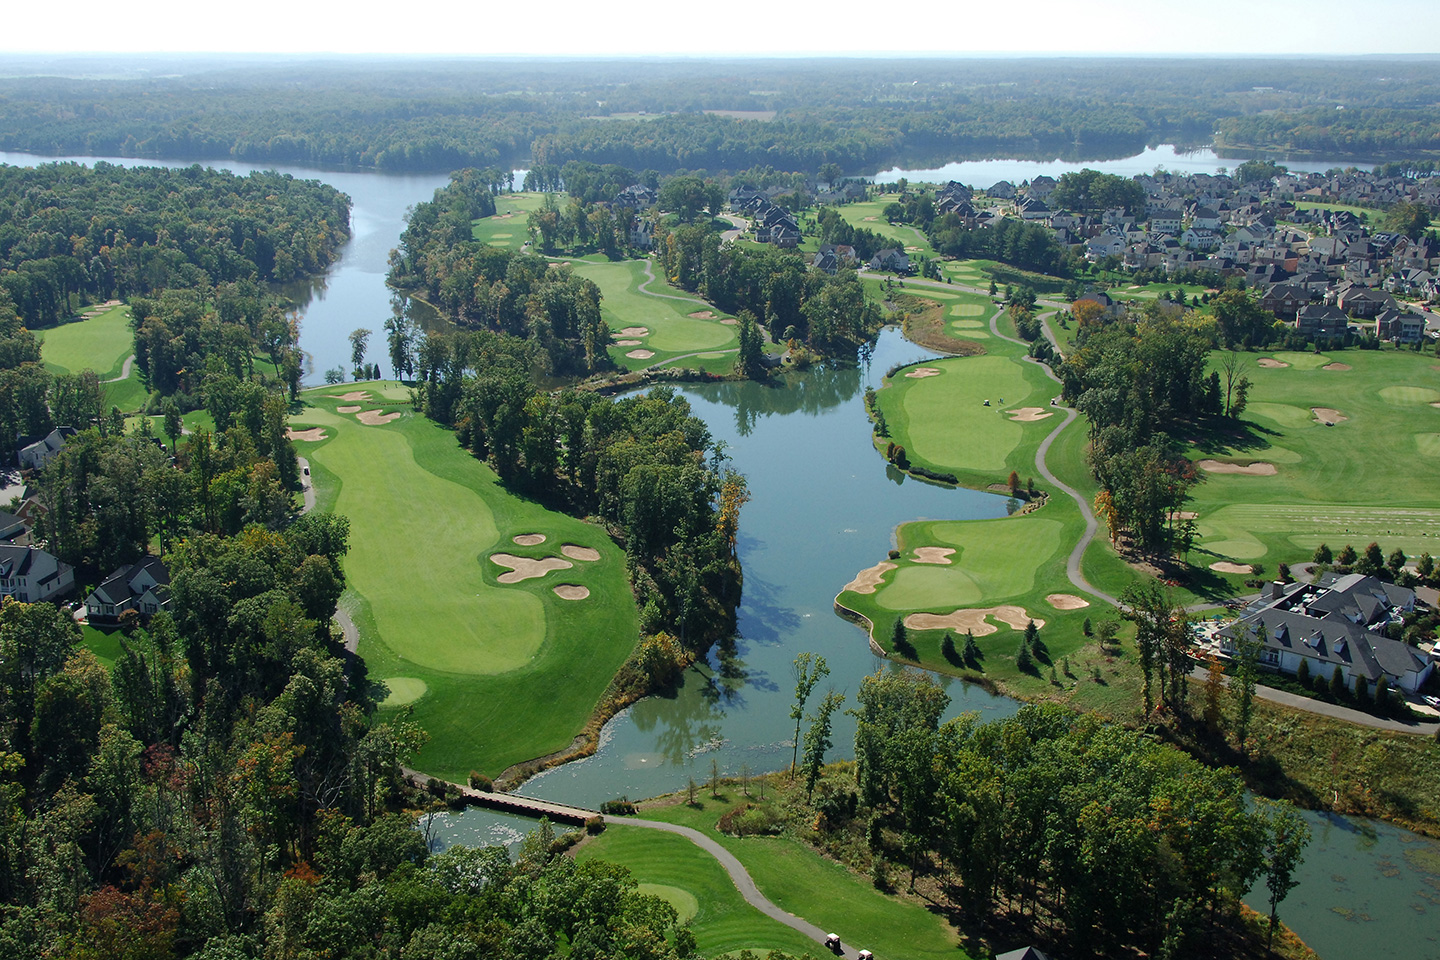 The golf course boom in the U.S. has created a growing need for land development and landscape architecture expertise.